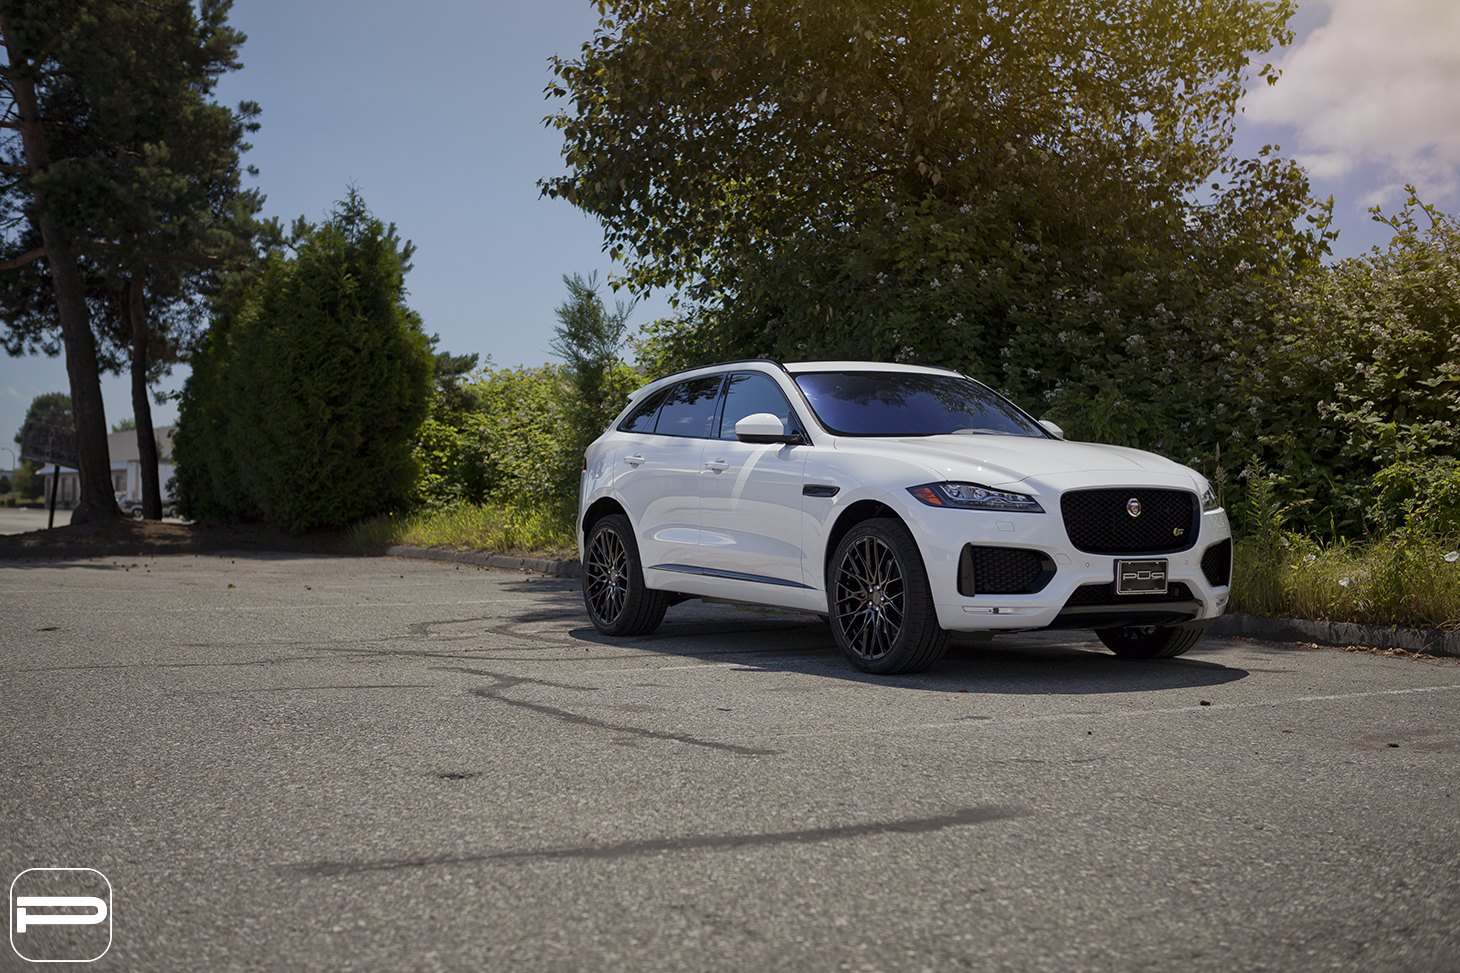 Blacked Out Mesh Grille on White Jaguar F-Pace - Photo by PUR Wheels